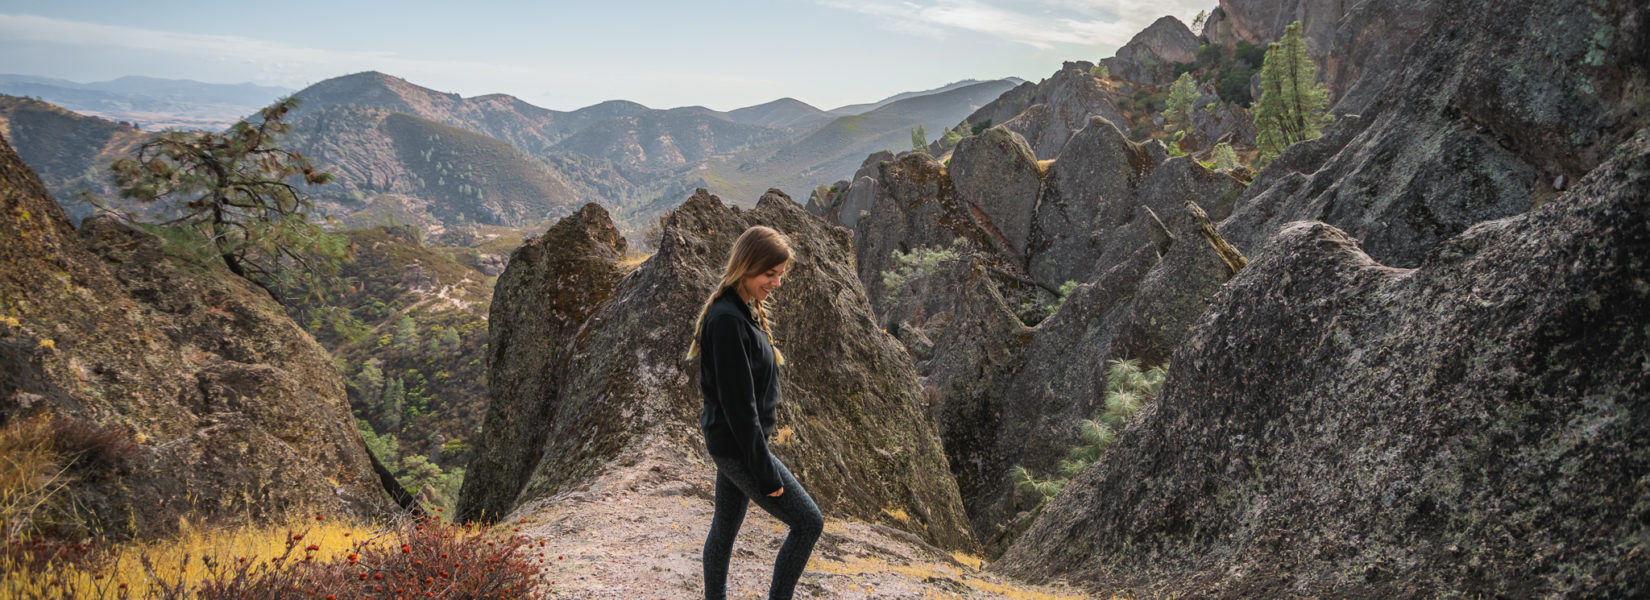 10 Cool Facts About the Underrated Pinnacles National Park